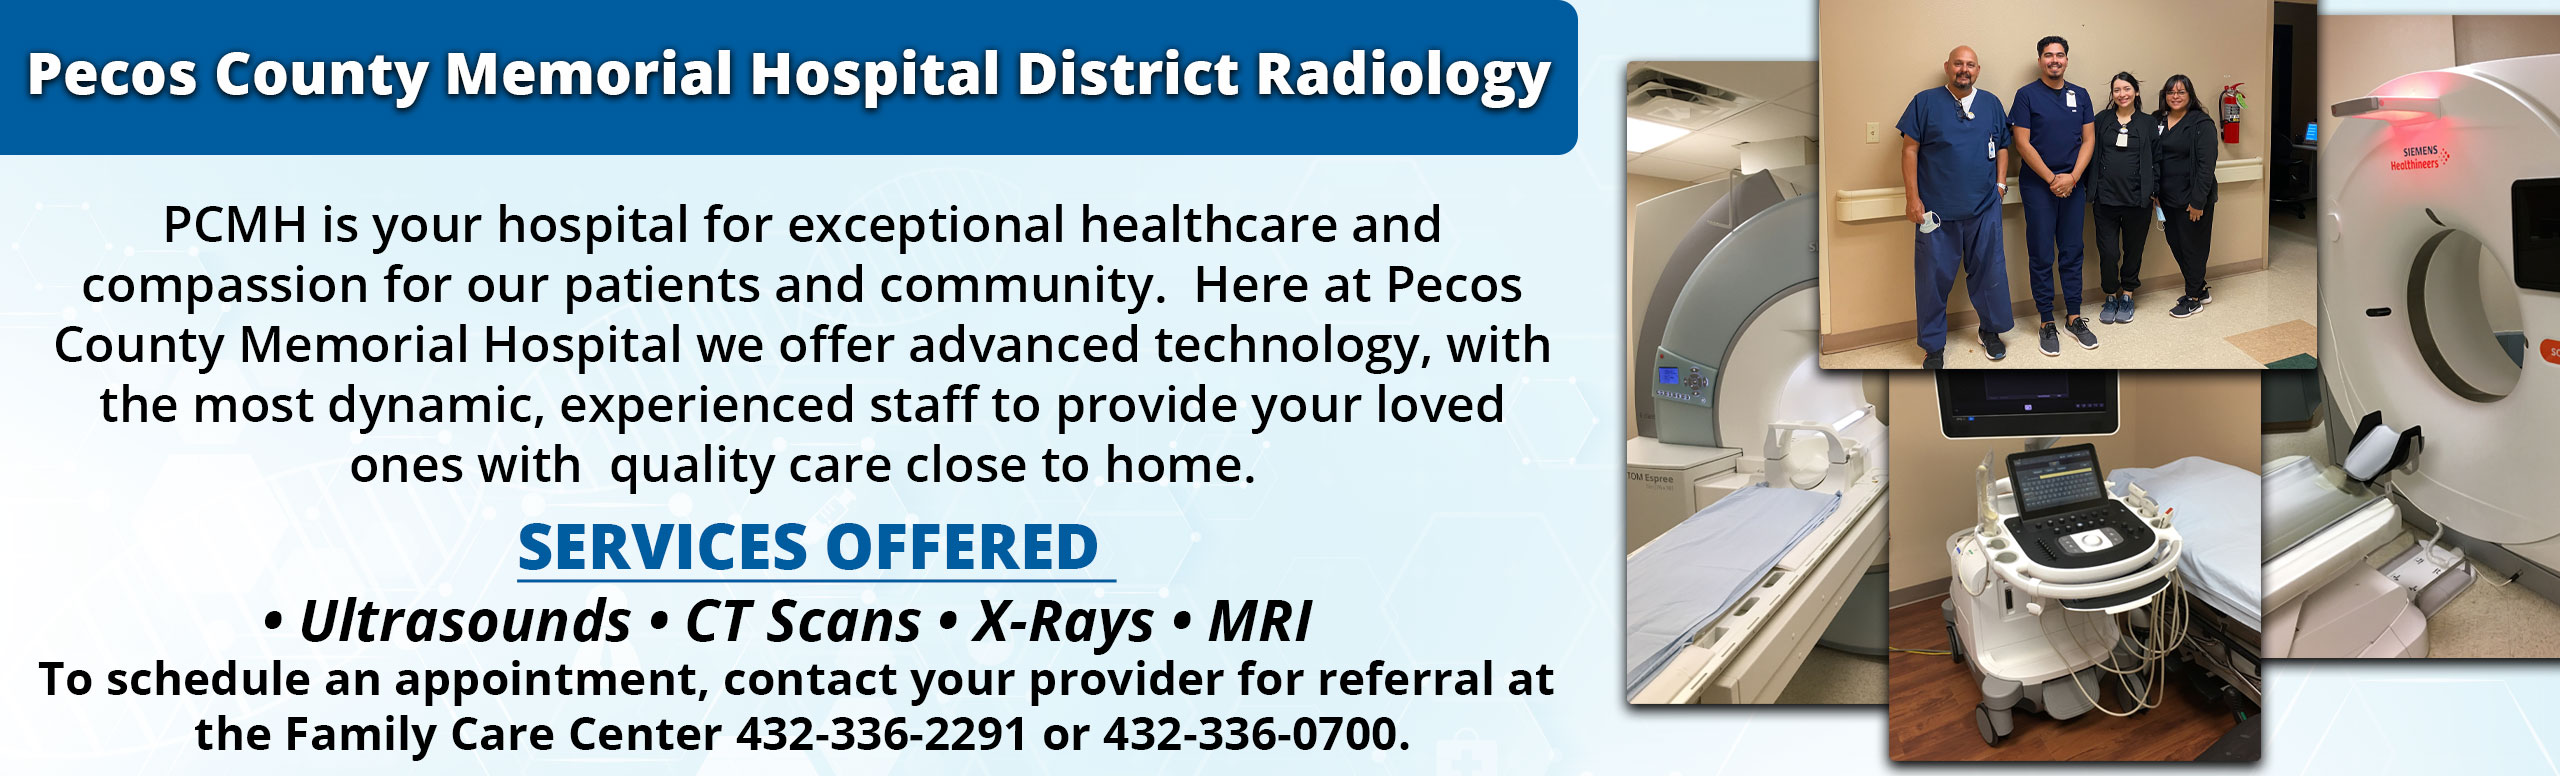 Pecos County Memorial Hospital Radiology

PCMH is your hospital for exceptional healthcare and compassion for our patients and community.  Here at Pecos County Memorial Hospital we offer advanced technology, with the most dynamic, experienced staff to provide your loved ones with  quality care close to home.

Services Offered 
• Ultrasounds • CT Scans • X-Rays • MRI 

To schedule an appointment, contact your provider for referral at 
the Family Care Center 432-336-2291 or 432-336-0700.